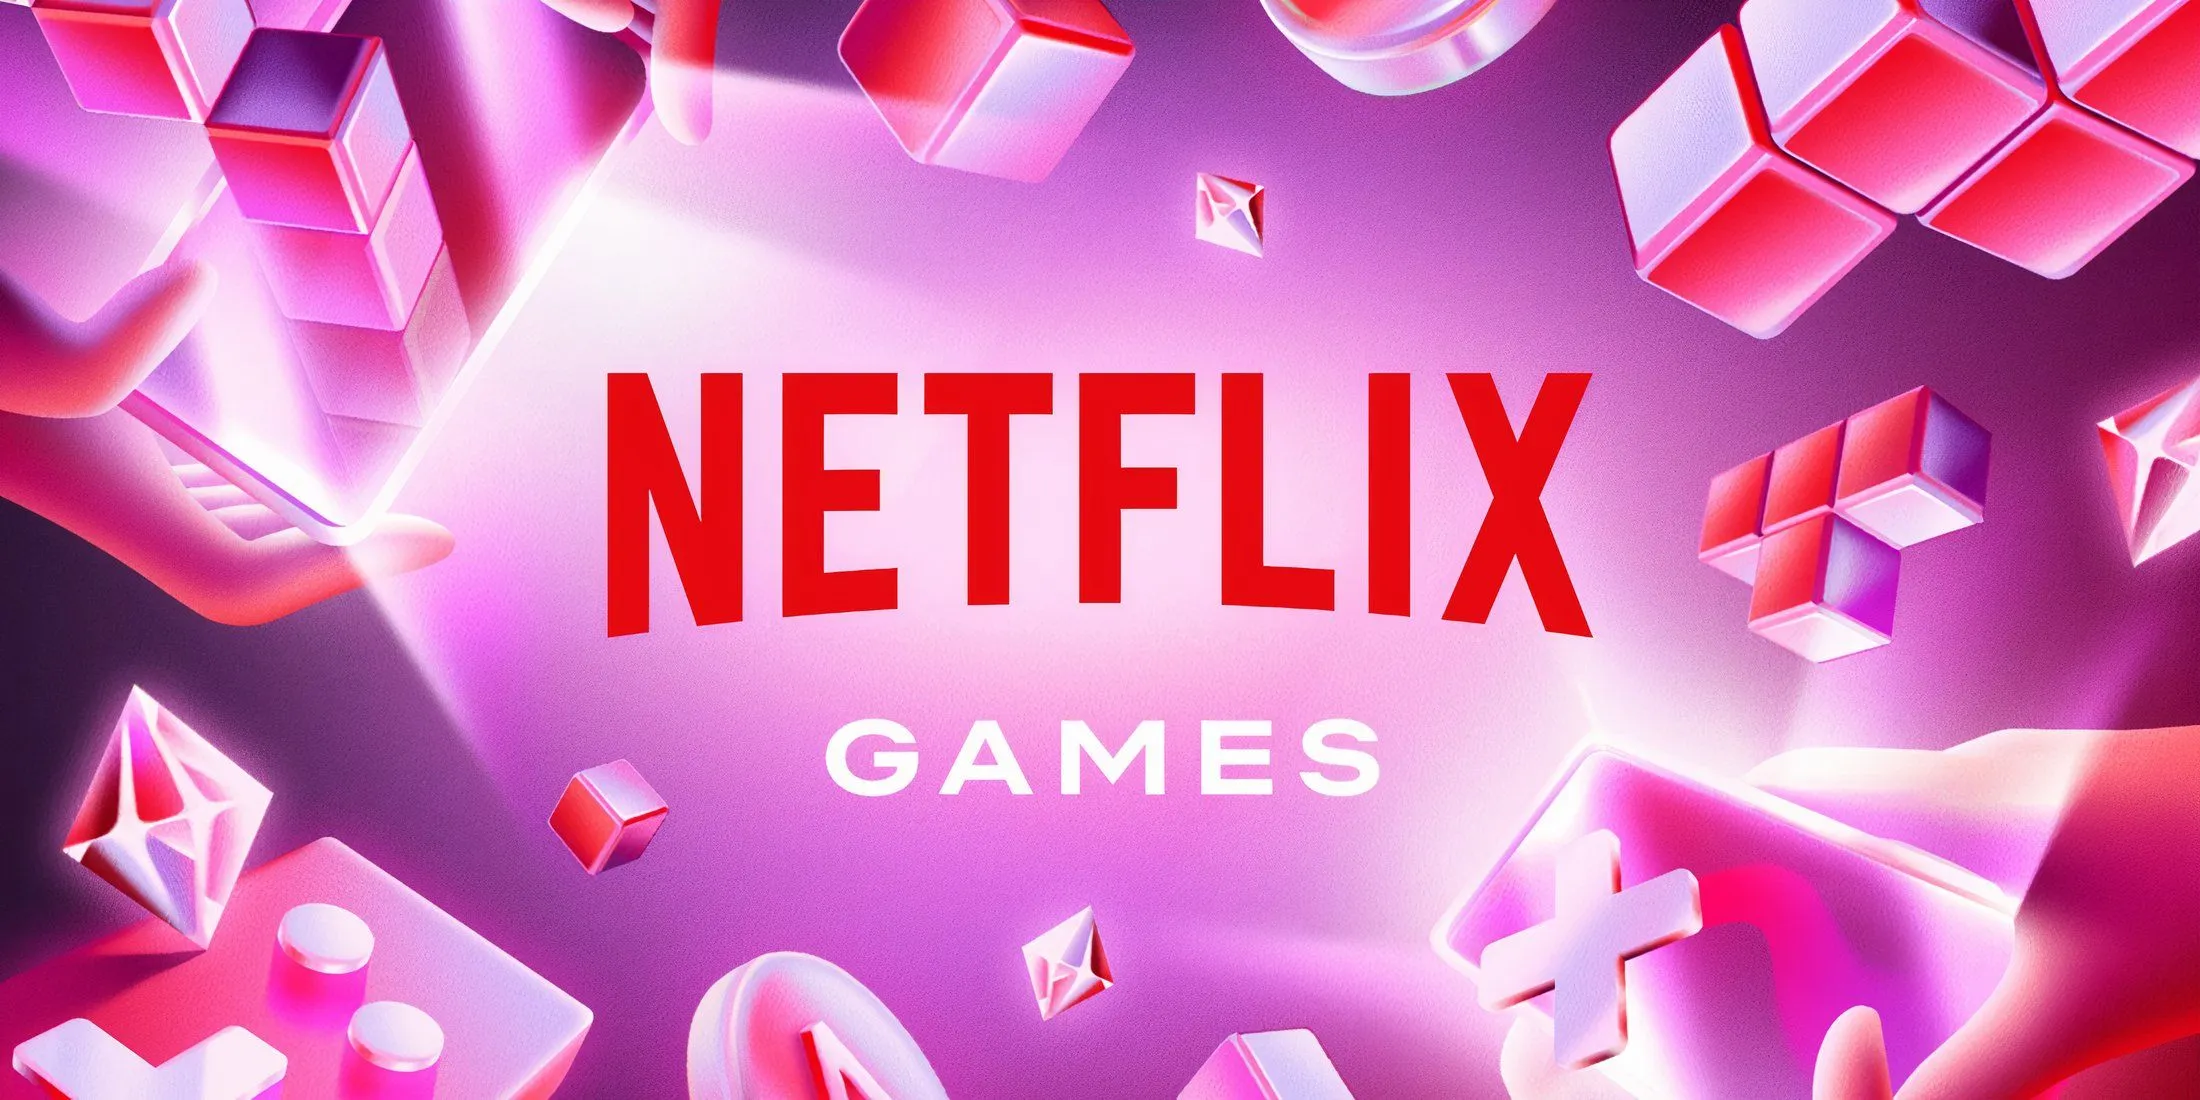 Netflix Reveals 14 New Games Coming This Summer